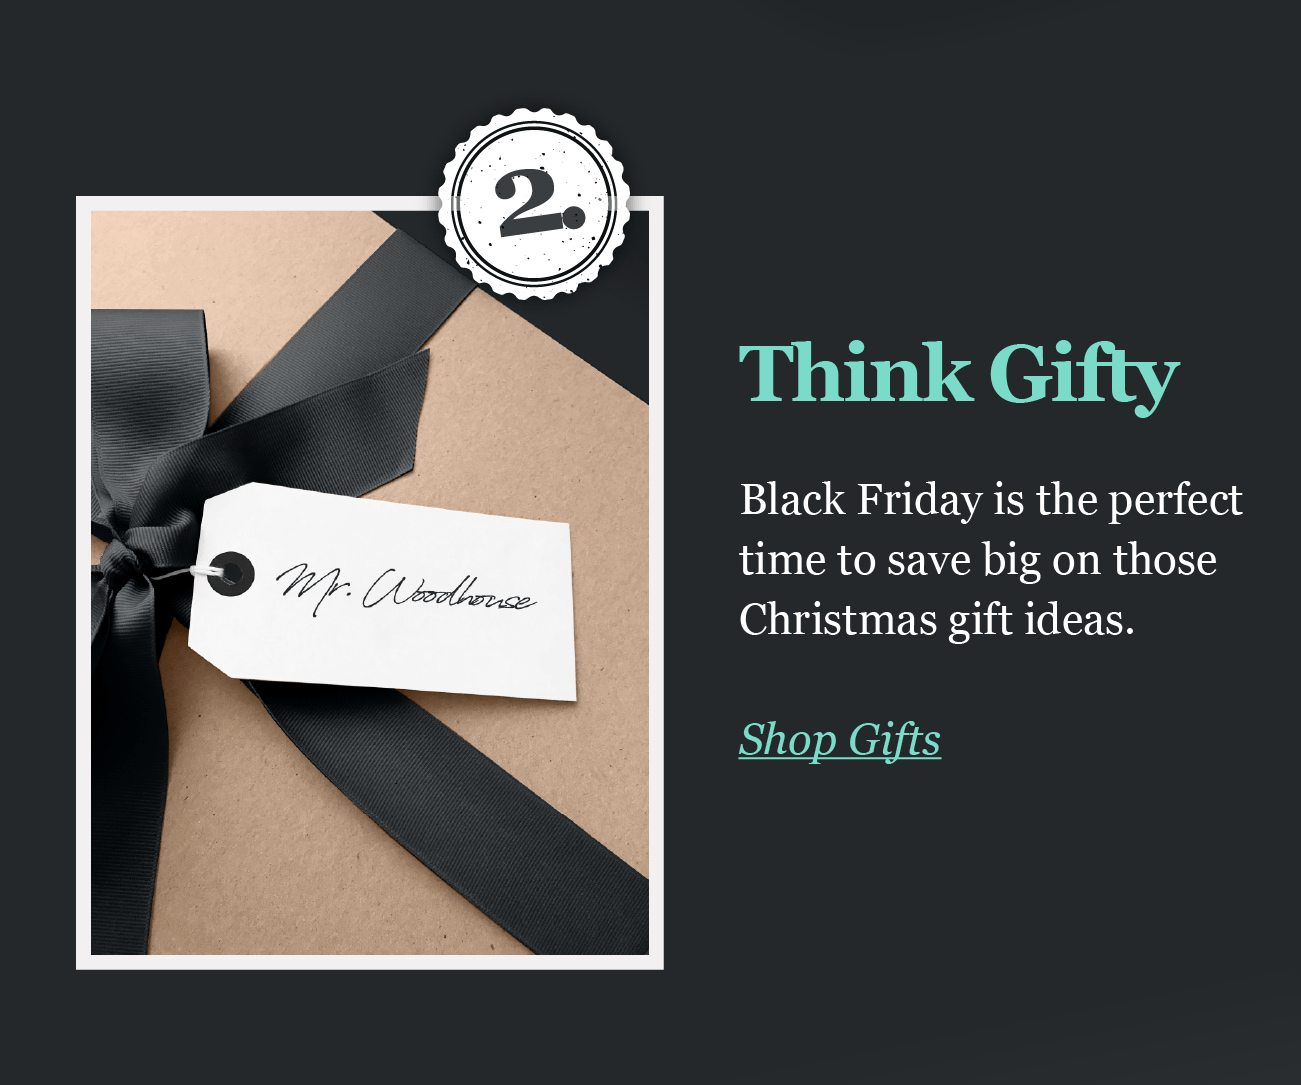 2.Think Gifty

Black Friday is the perfect
time to save big on those
Christmas gift ideas.
Shop Gifts
